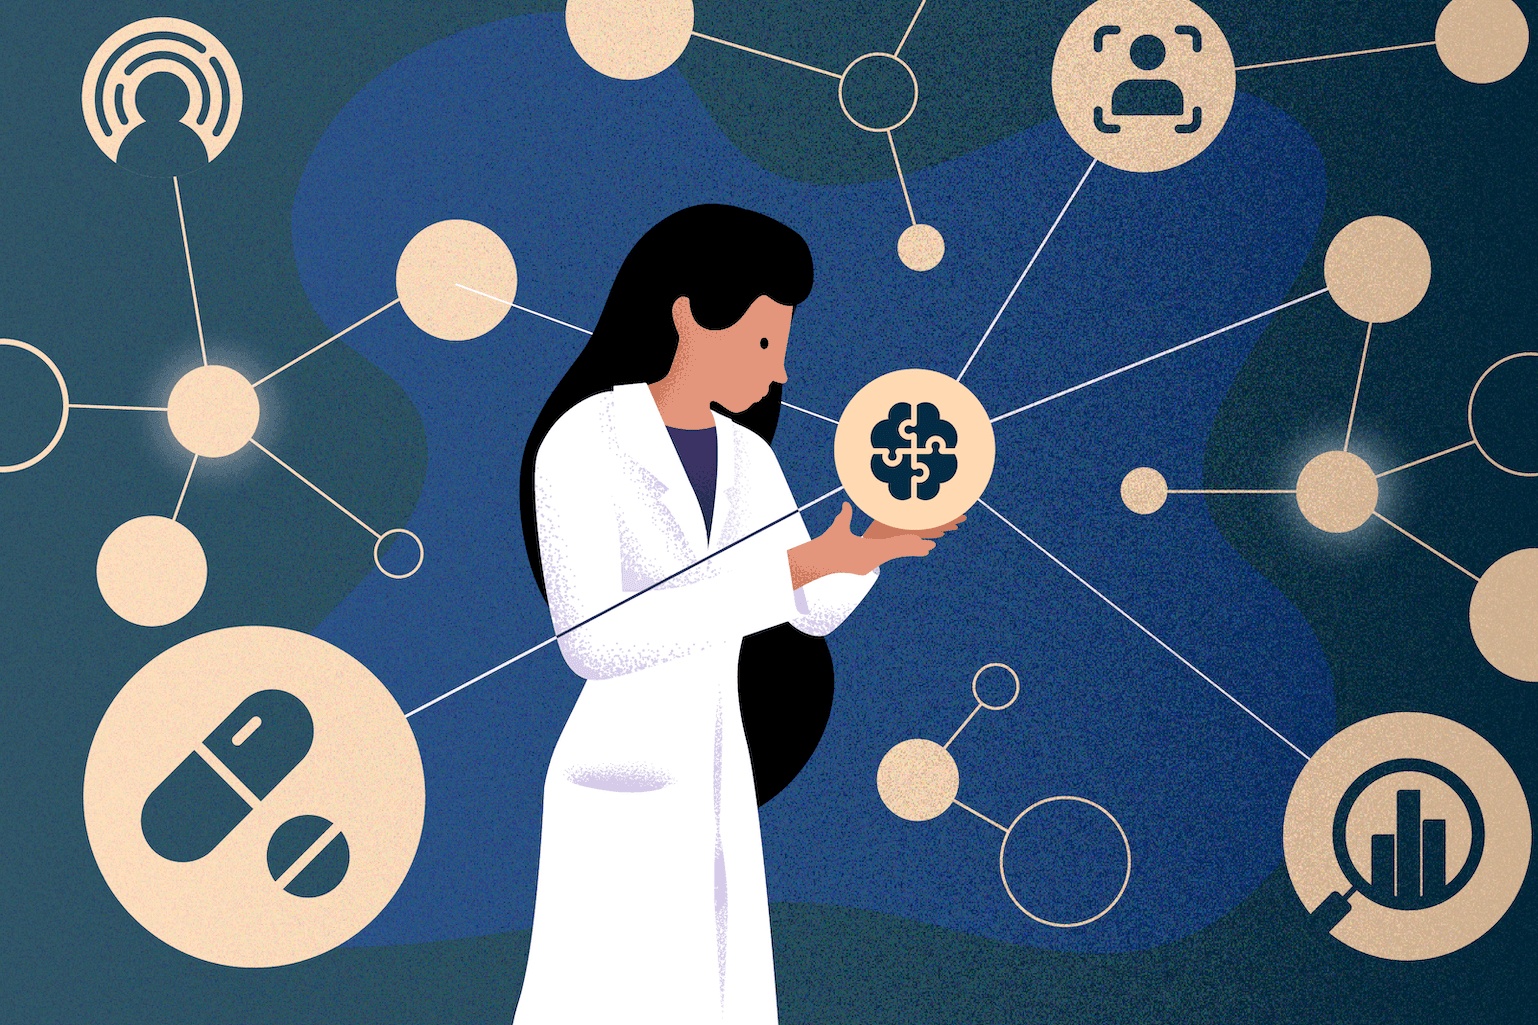 Illustration of a scientist in a lab coat holding a sphere with an image of brain inside. The sphere is connected to a network of spheres containing images related to mental health, including medication, data collection and facial recognition software. 